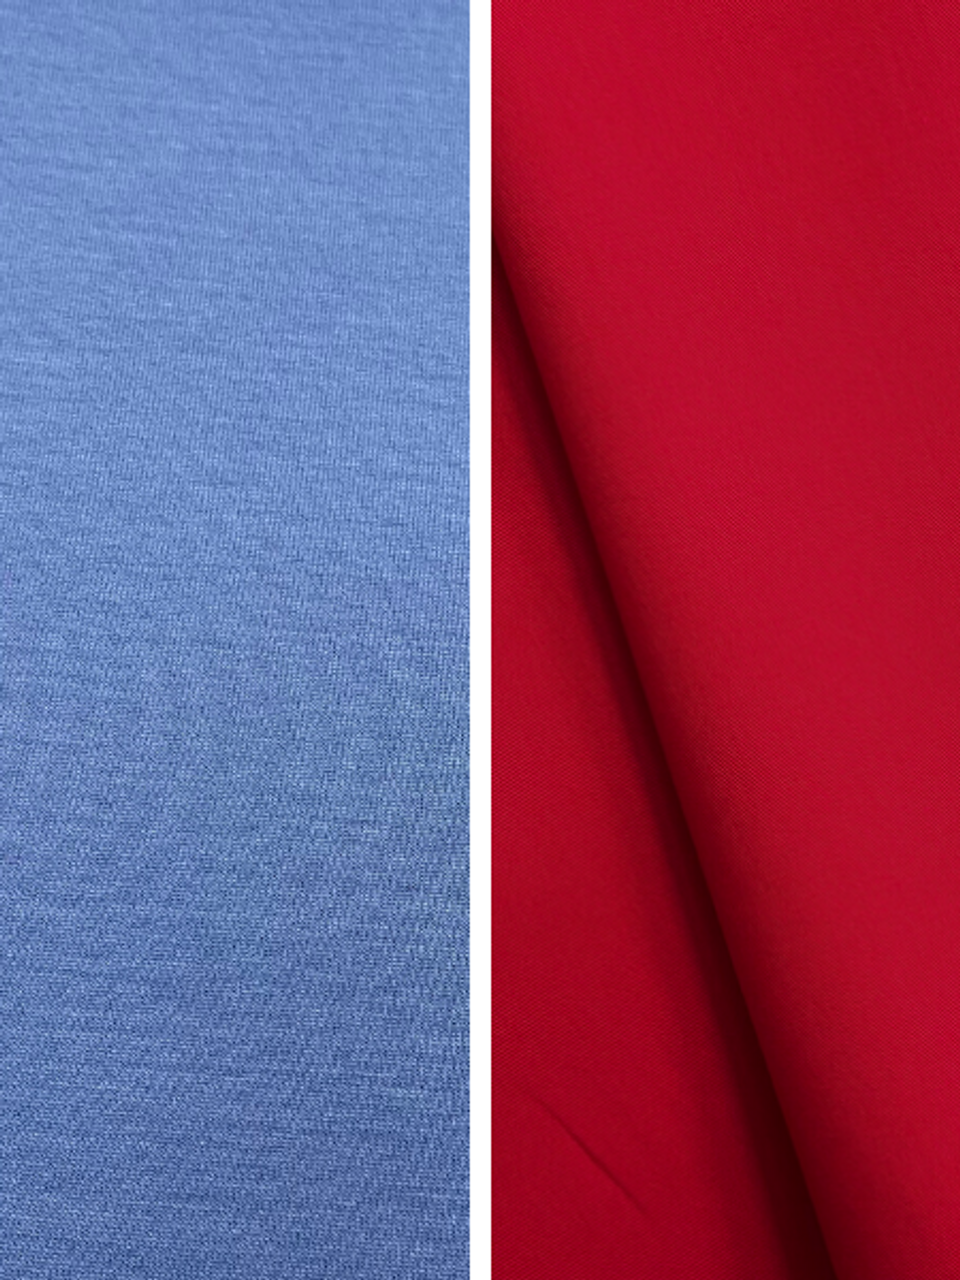 French Blue Rayon Jersey Knit - Sew Much Fabric